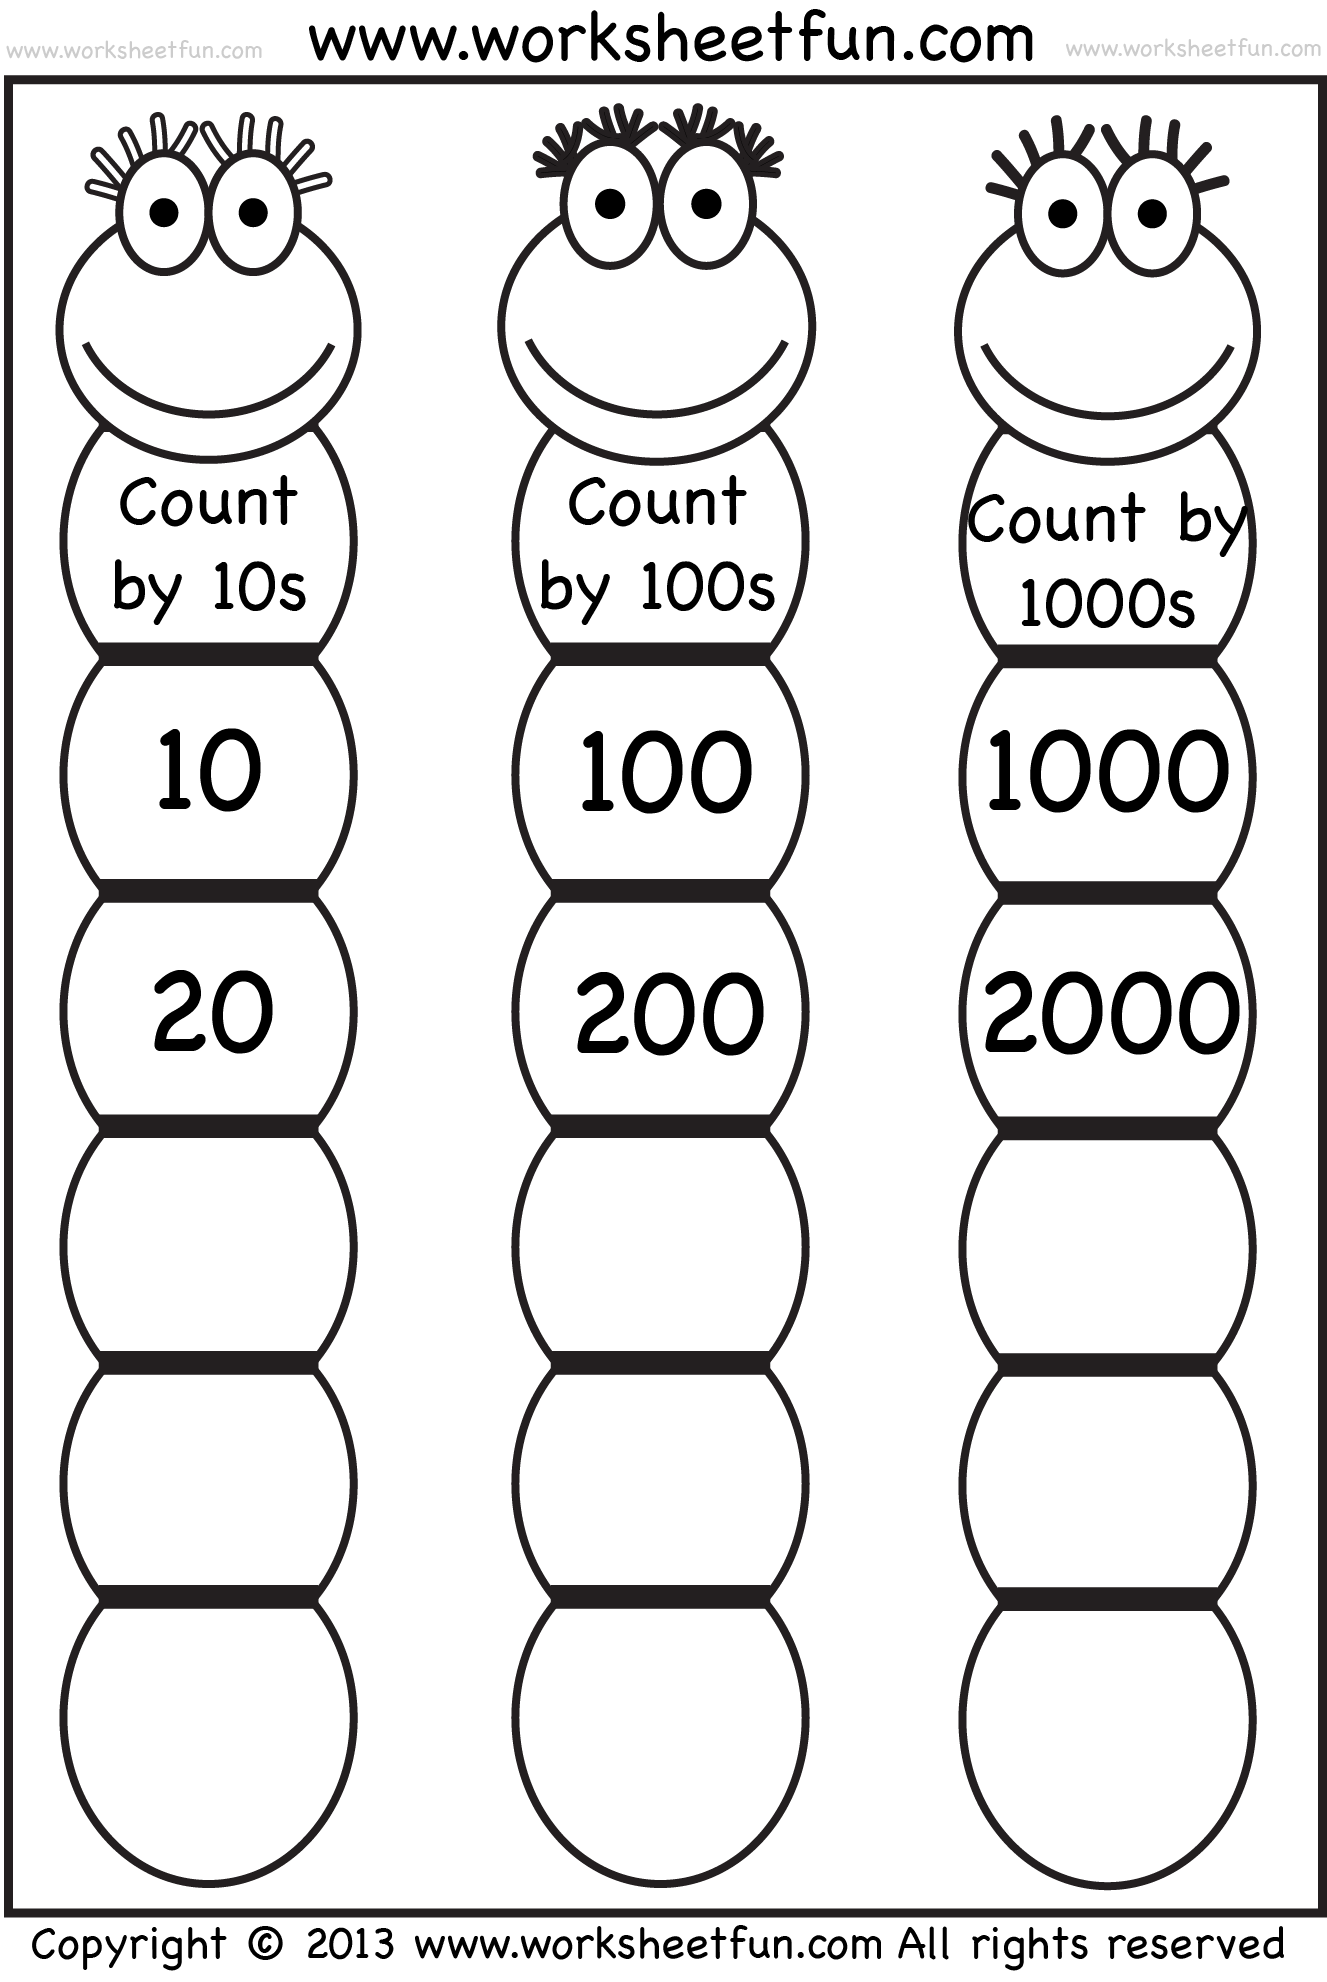 Counting By 11s Worksheet 